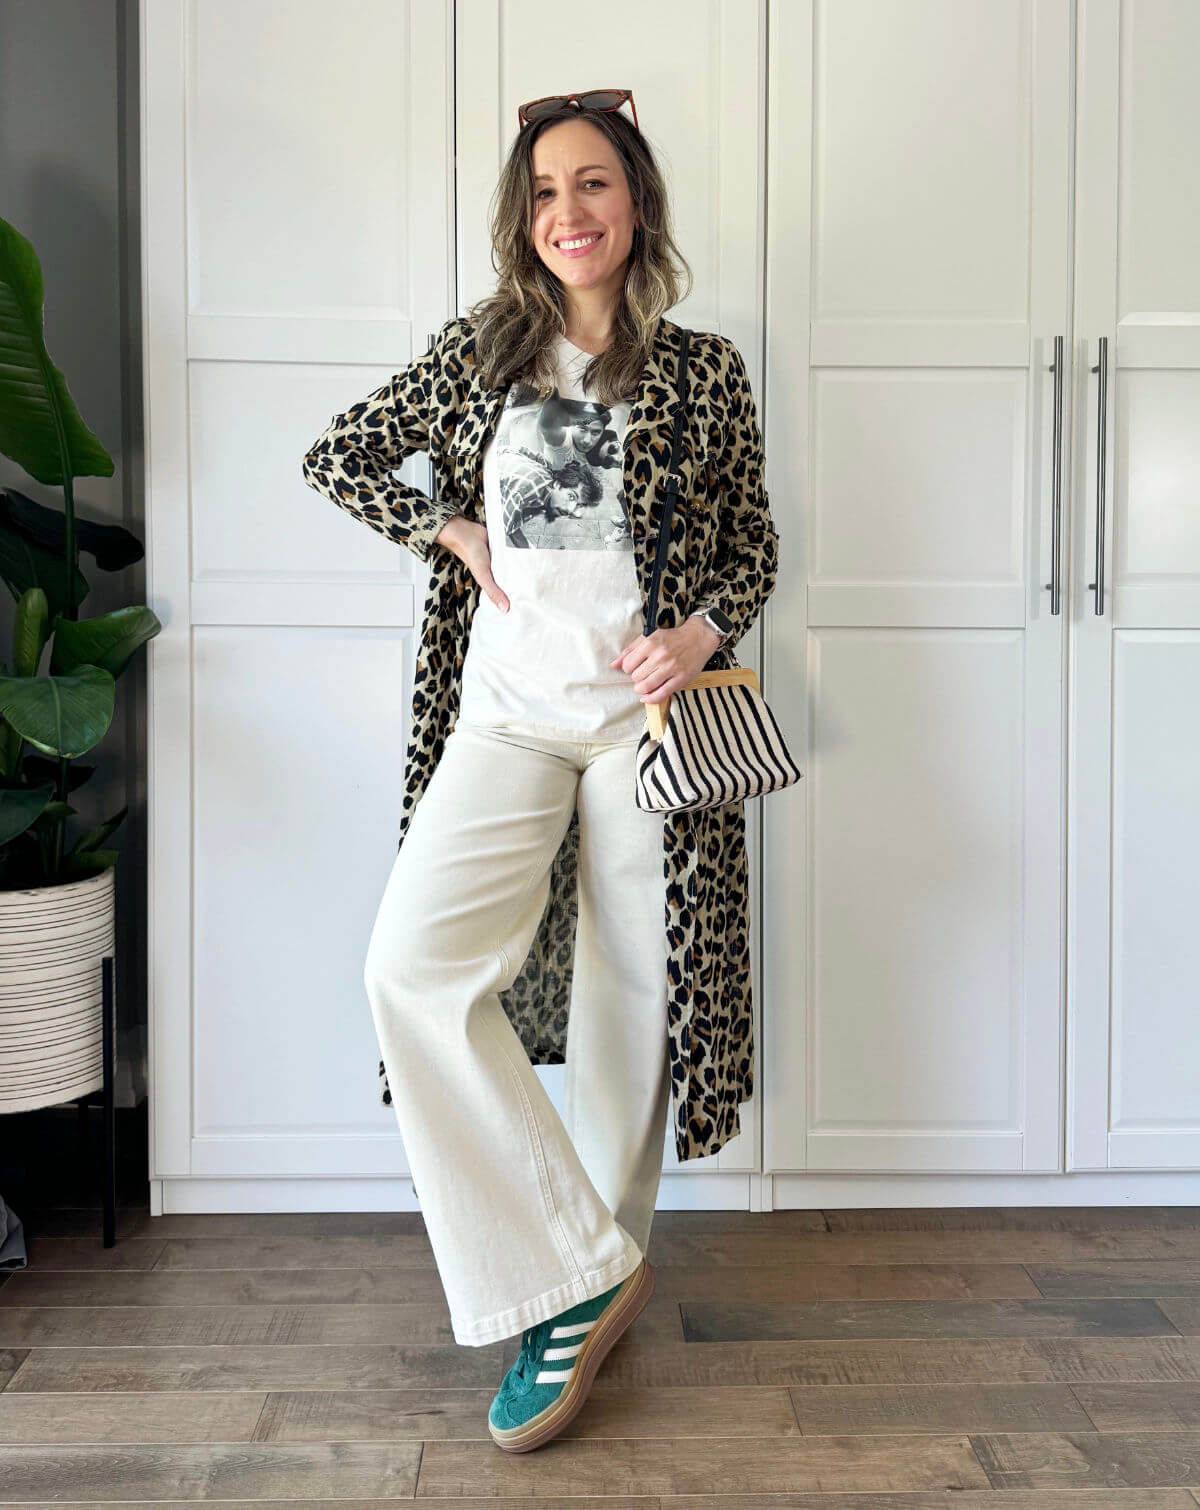 Brunette woman posing wearing off white wide leg jeans, graphic tee, green sneakers and leopard print trench coat.